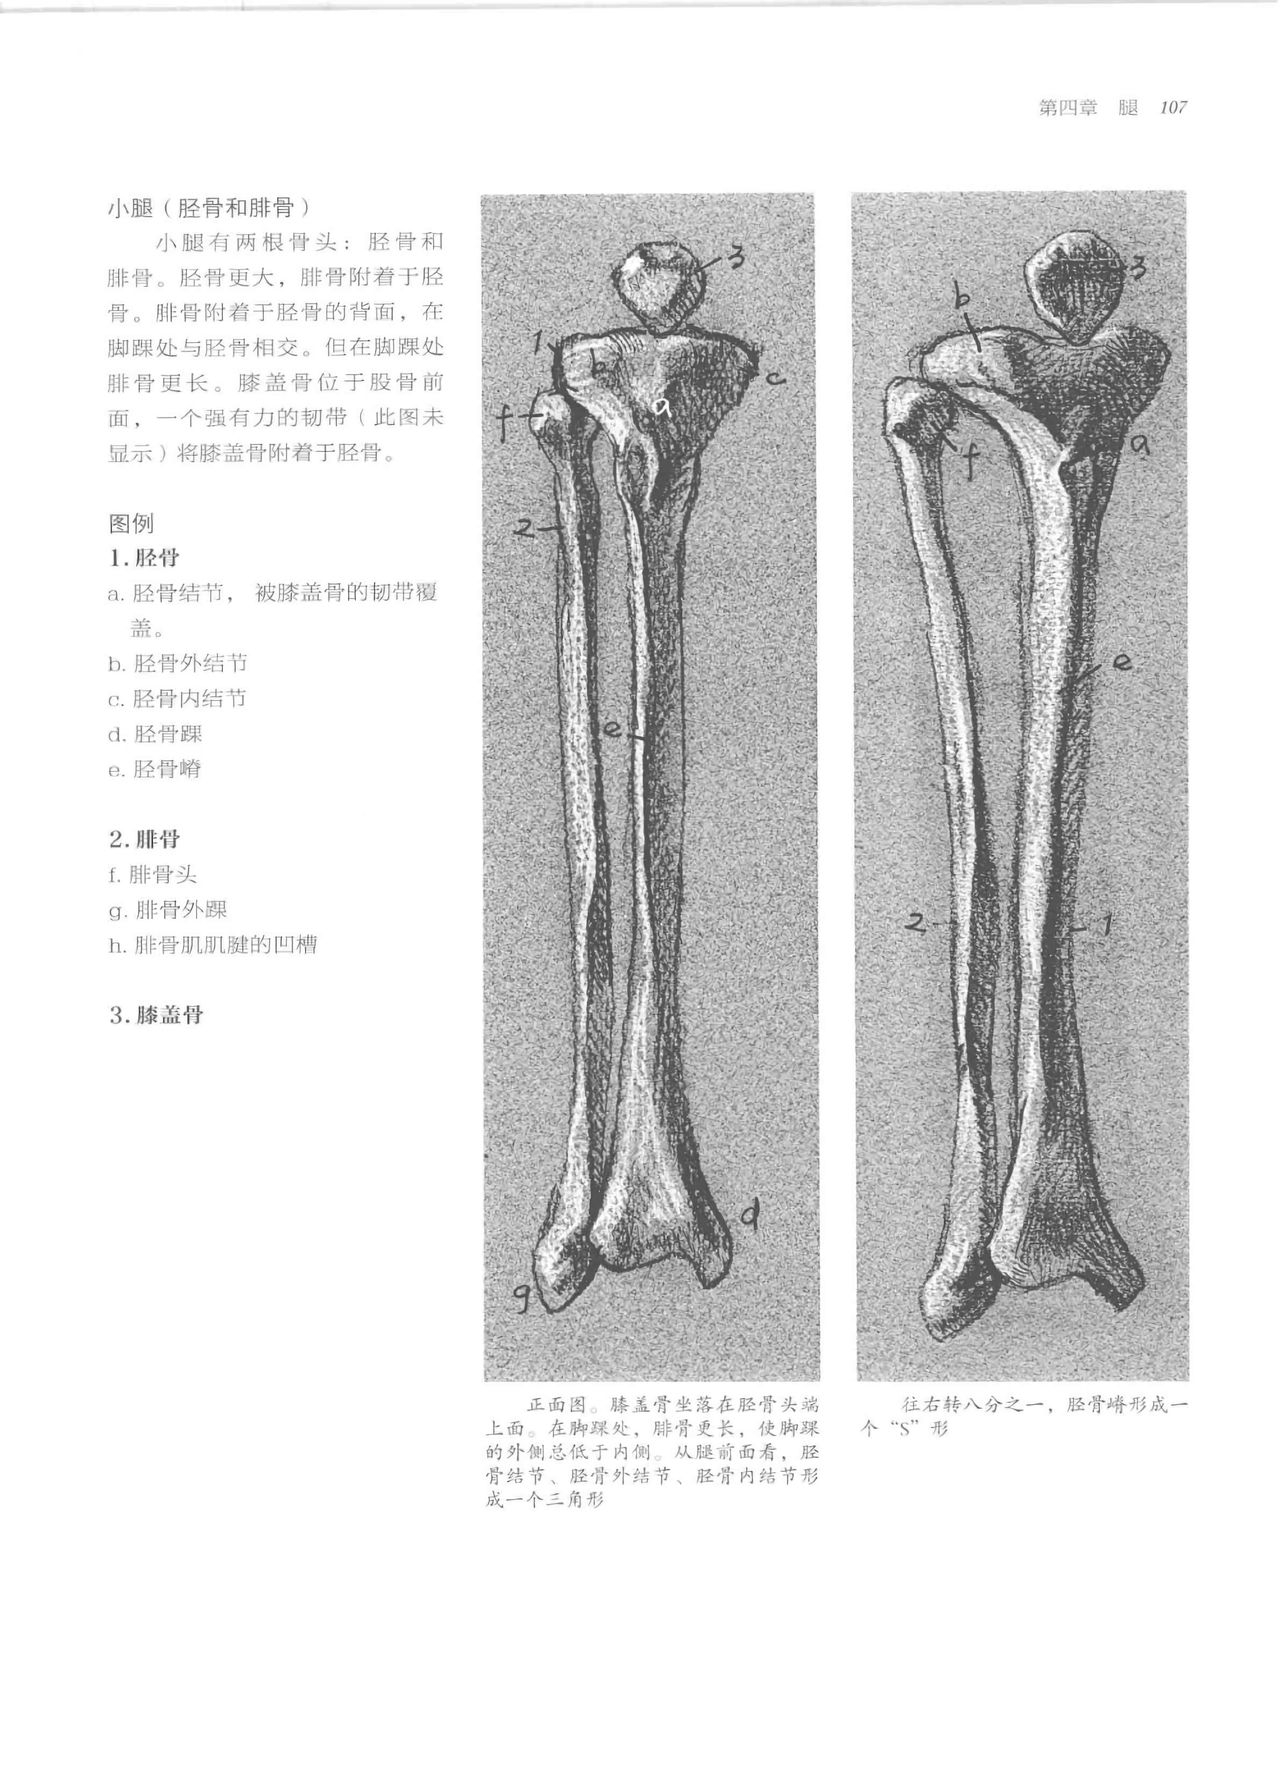 Anatomy-A Complete Guide for Artists - Joseph Sheppard [Chinese] 107